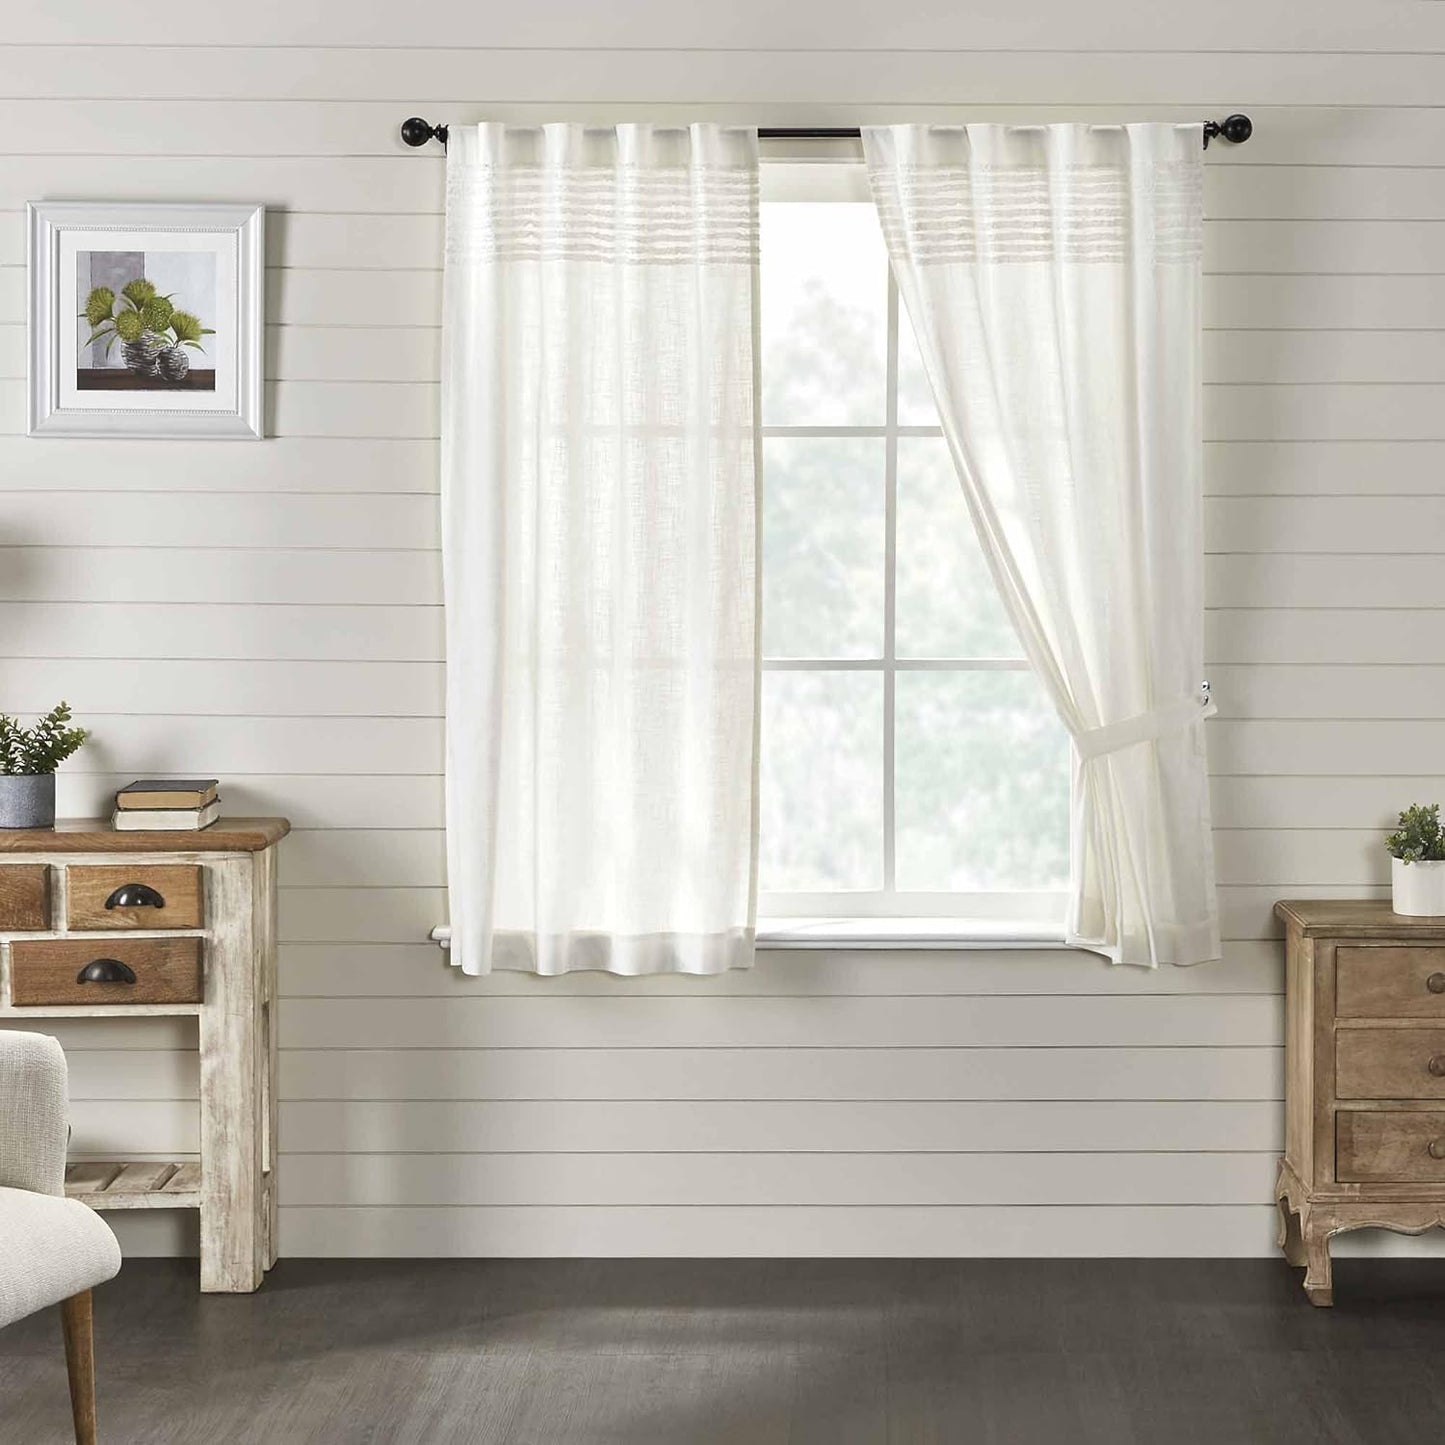 Kathryn Tier Curtains, Set of 2, 24" Long, Ruffled Curtains in a Linen-Look Soft White Cotton Semi-Sheer Fabric, Farmhouse, Cottage, Country Style Sheer Kitchen Café Curtains  Piper Classics 63" Panels  